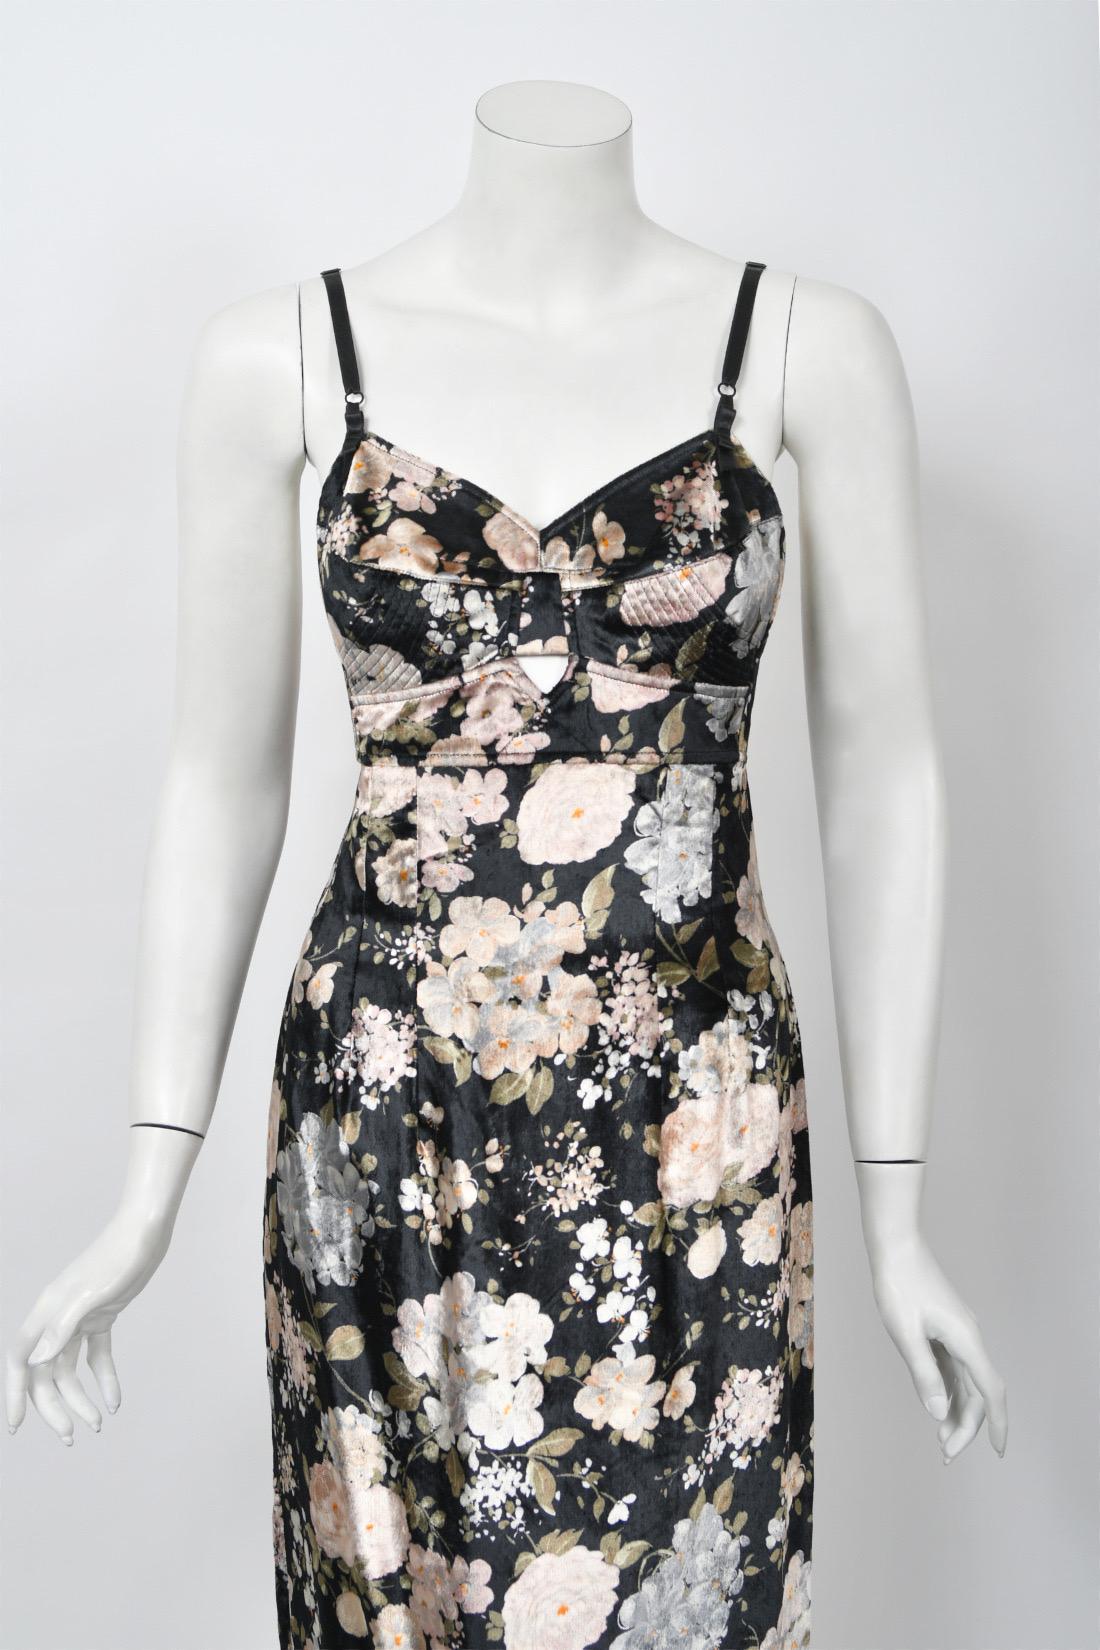 1997 Dolce & Gabbana Floral Stretch Velvet Cut-Out Bustier Slip Dress with Tags  For Sale 2